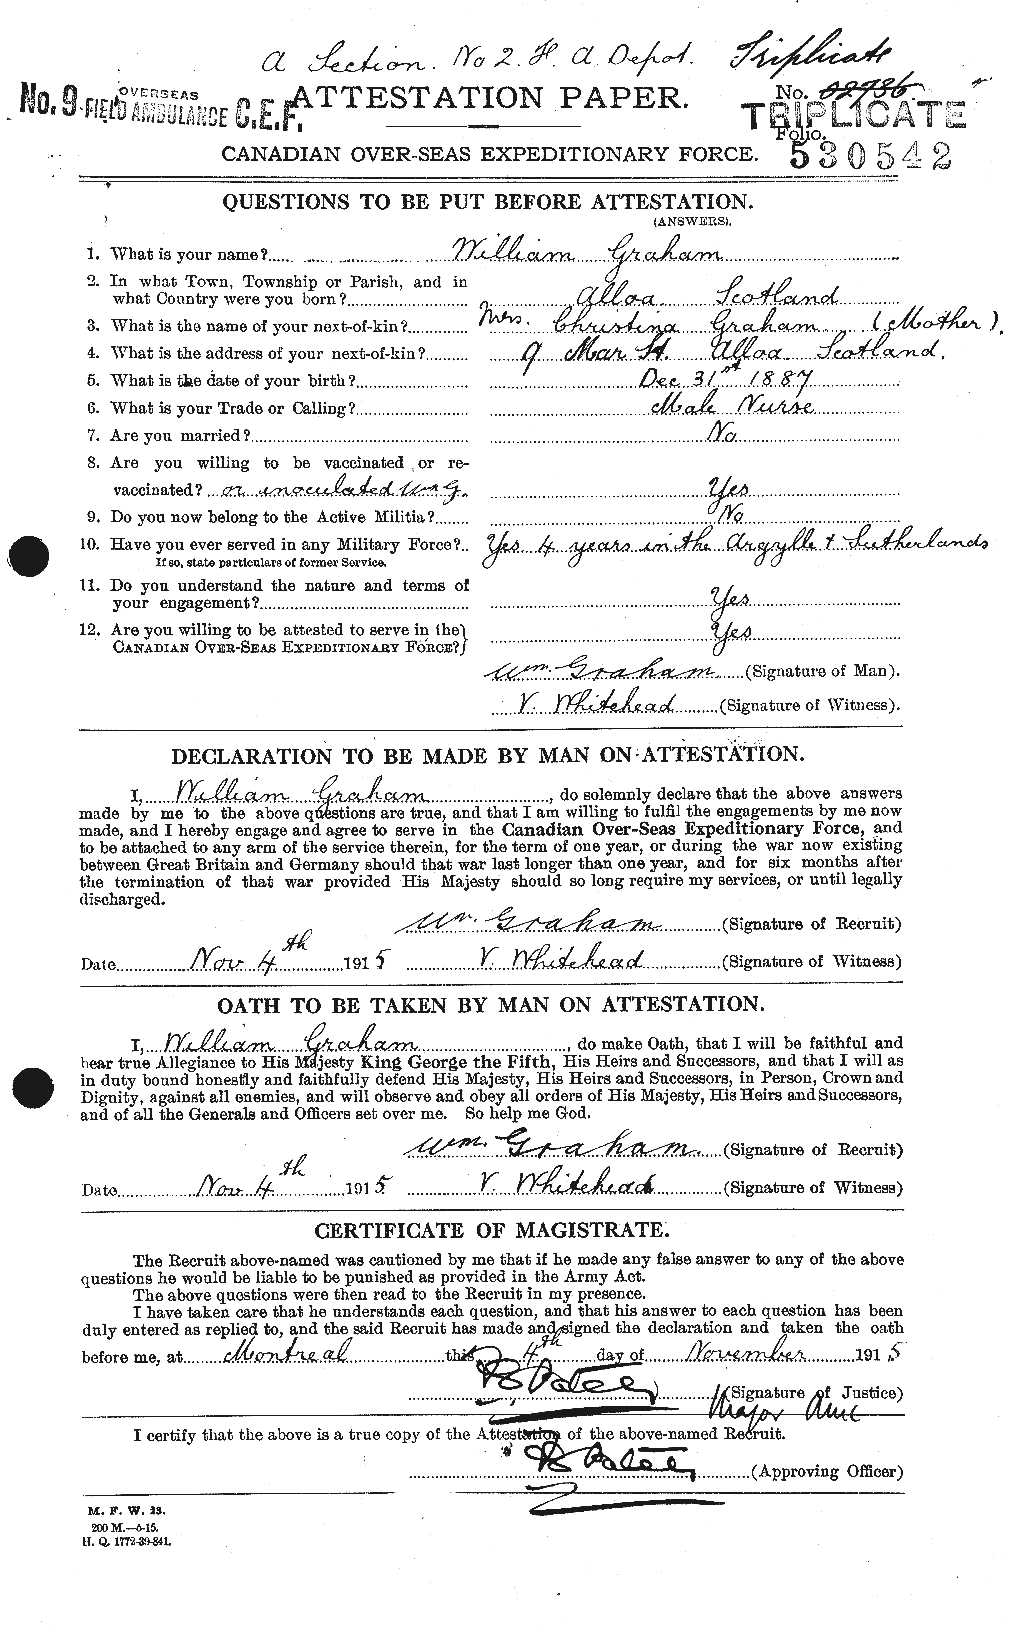 Personnel Records of the First World War - CEF 362712a